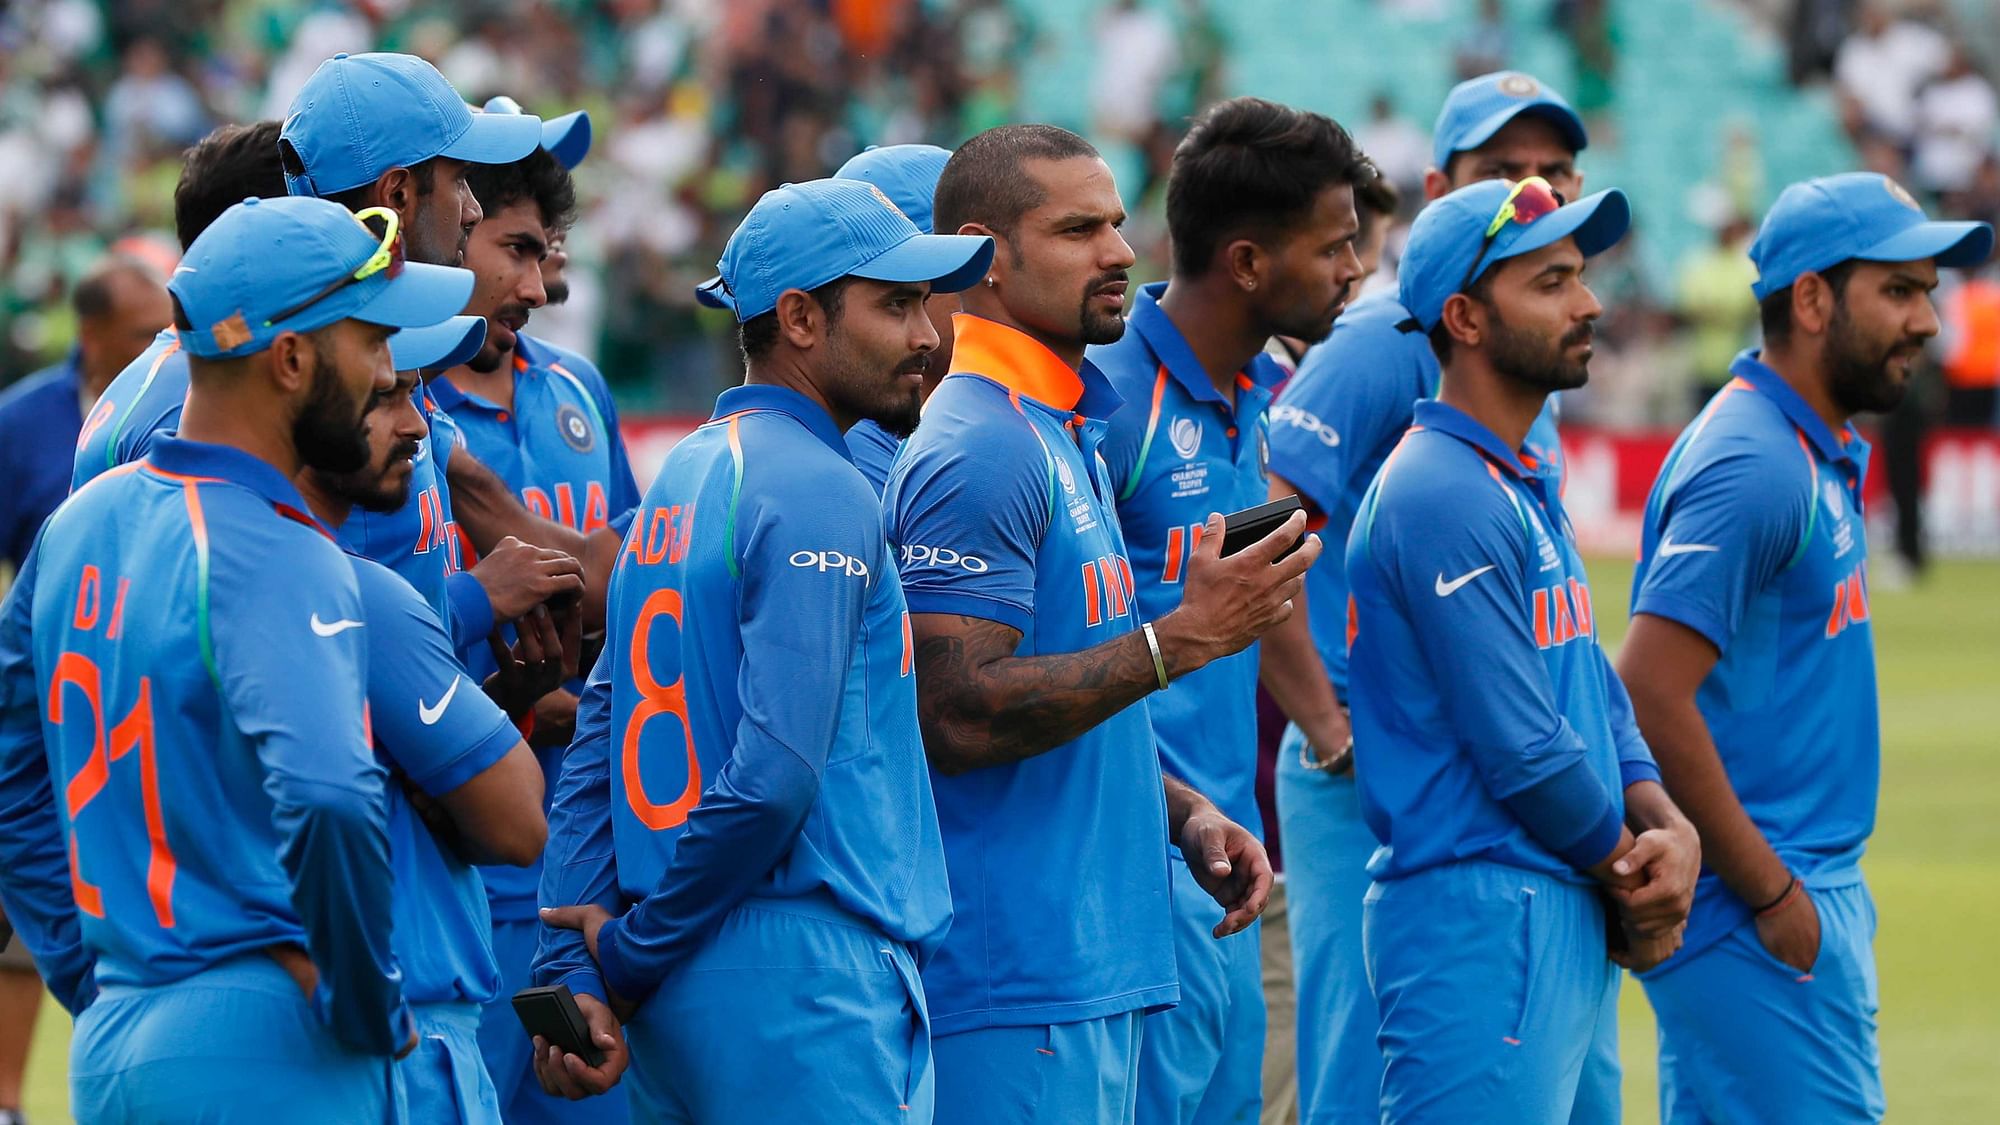 India players attend the award ceremony for the ICC Champions Trophy at The Oval in London. (Photo: AP)